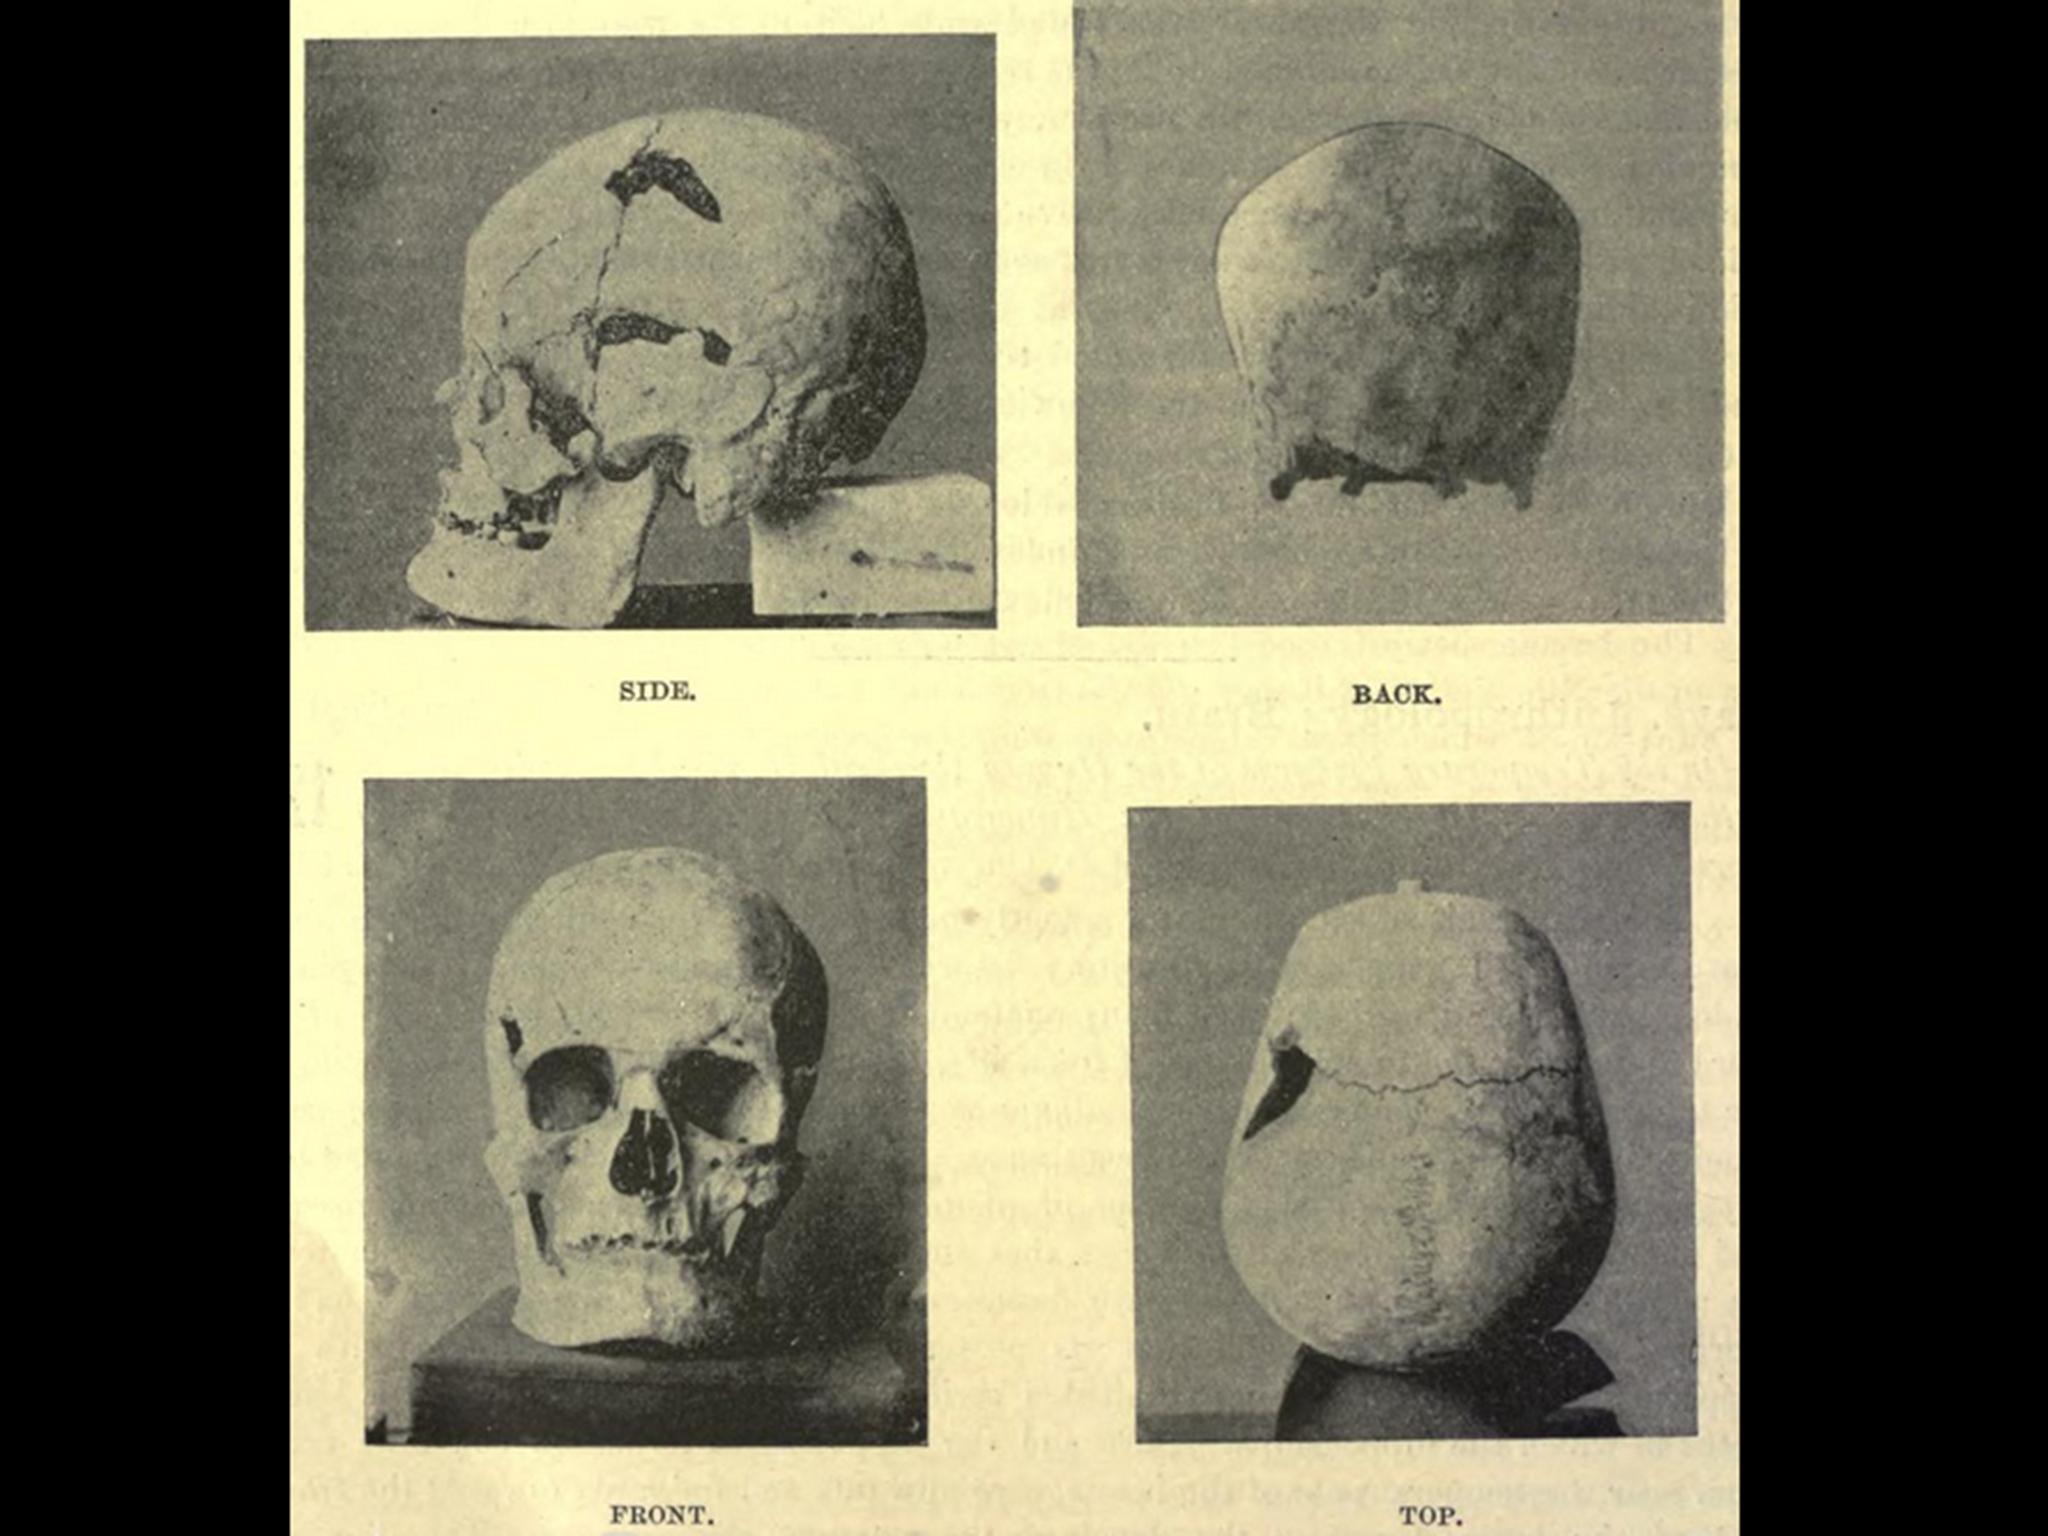 Images from 1901 of the skull that is believed to belong to Pharaoh Sanakht